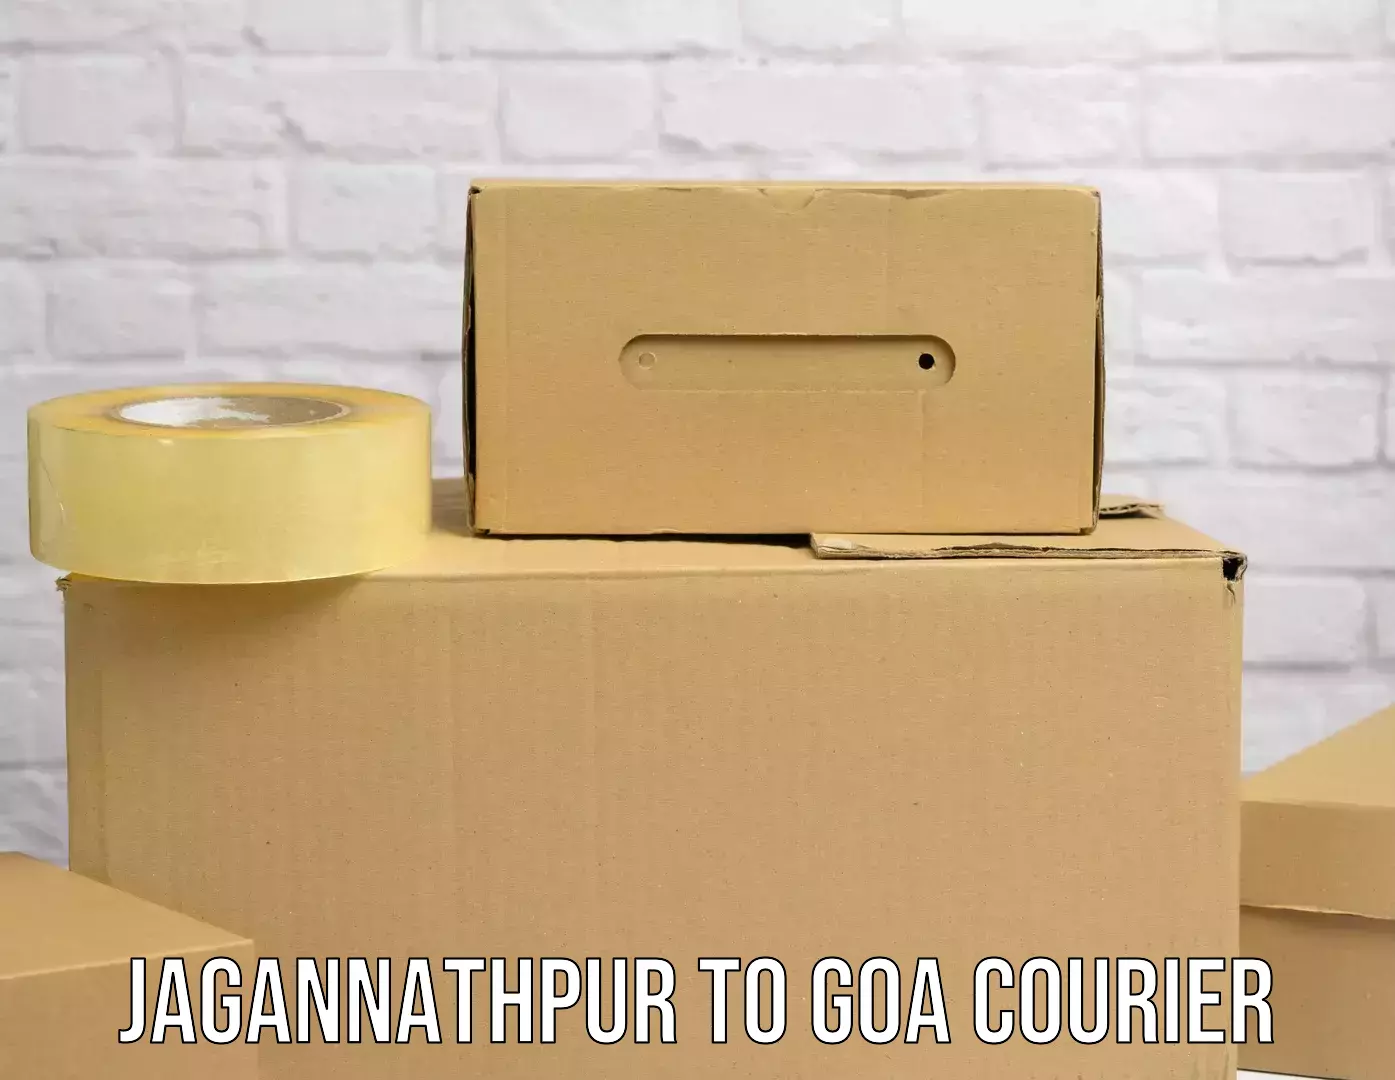 Nationwide delivery network Jagannathpur to Goa